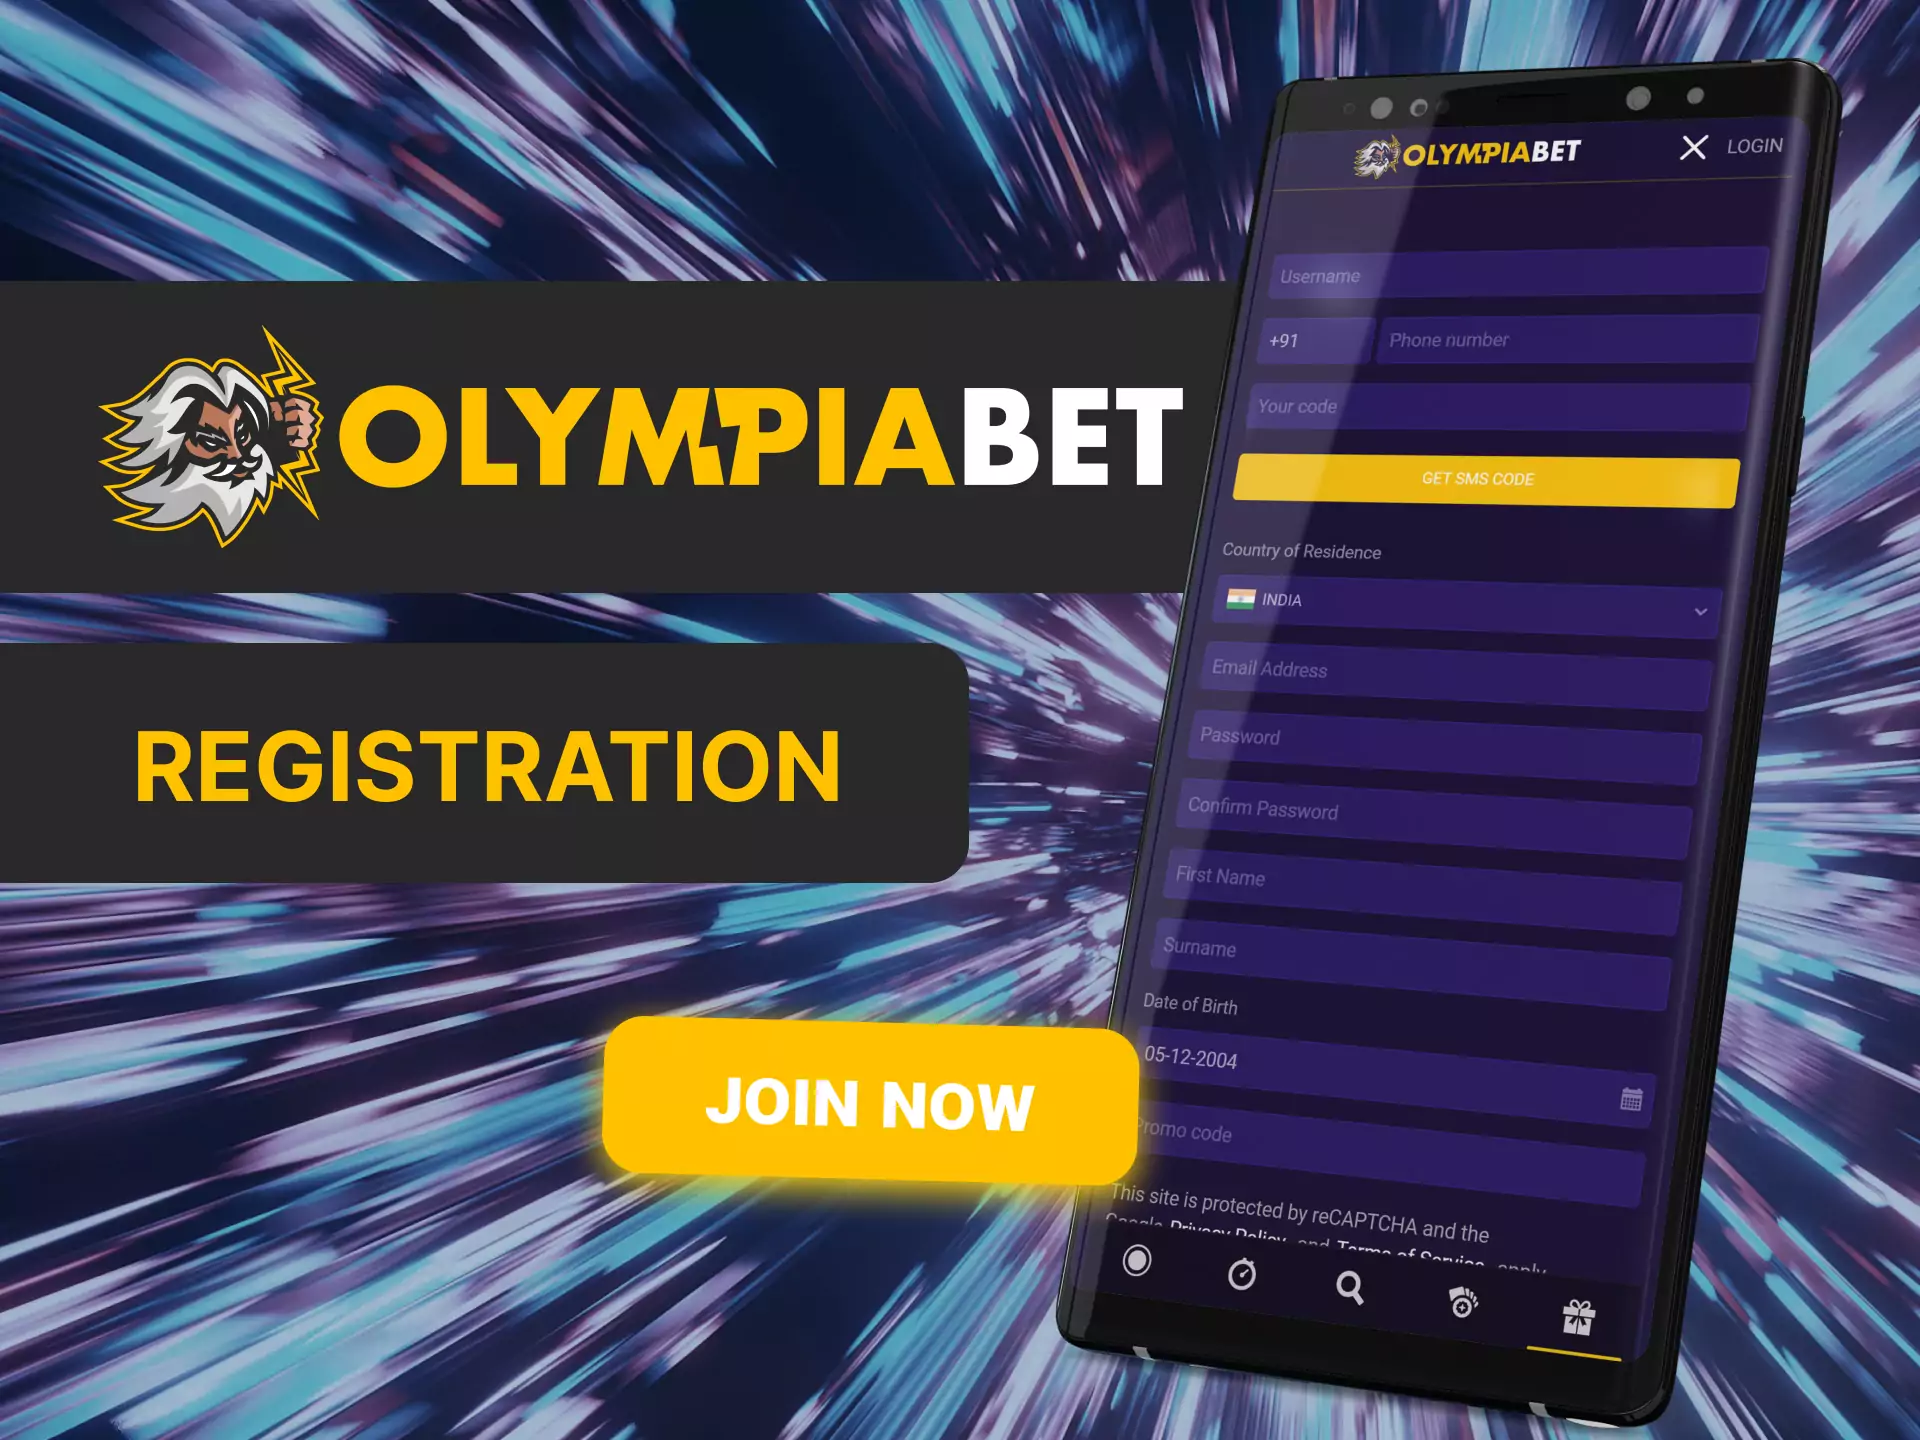 Go through a simple and quick registration in OlympiaBet, get bonuses and place bets.